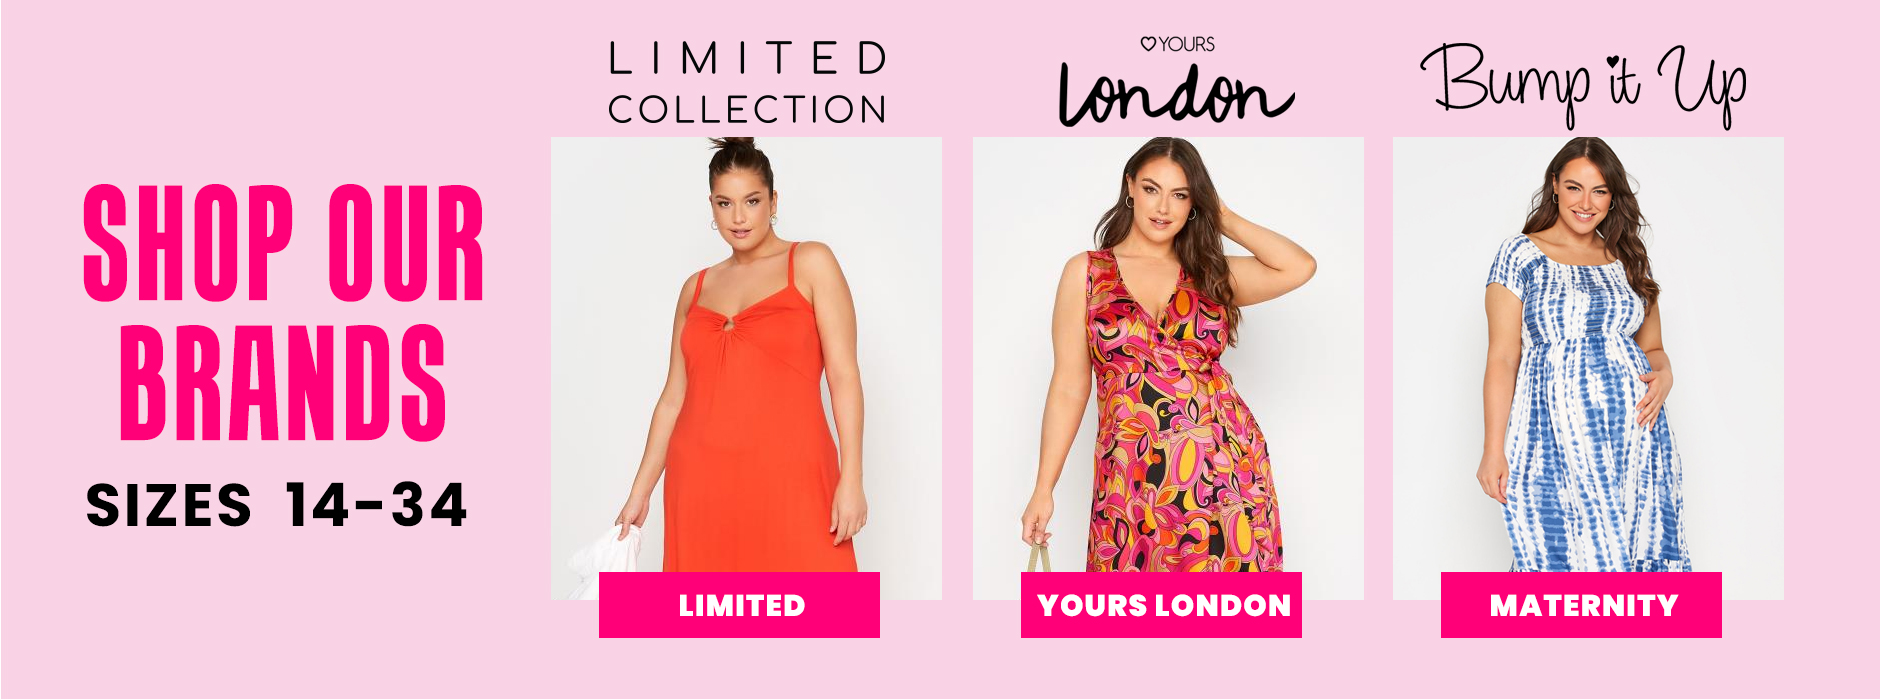 Plus Size Clothing for Women in Sizes 14-40 | Yours Clothing